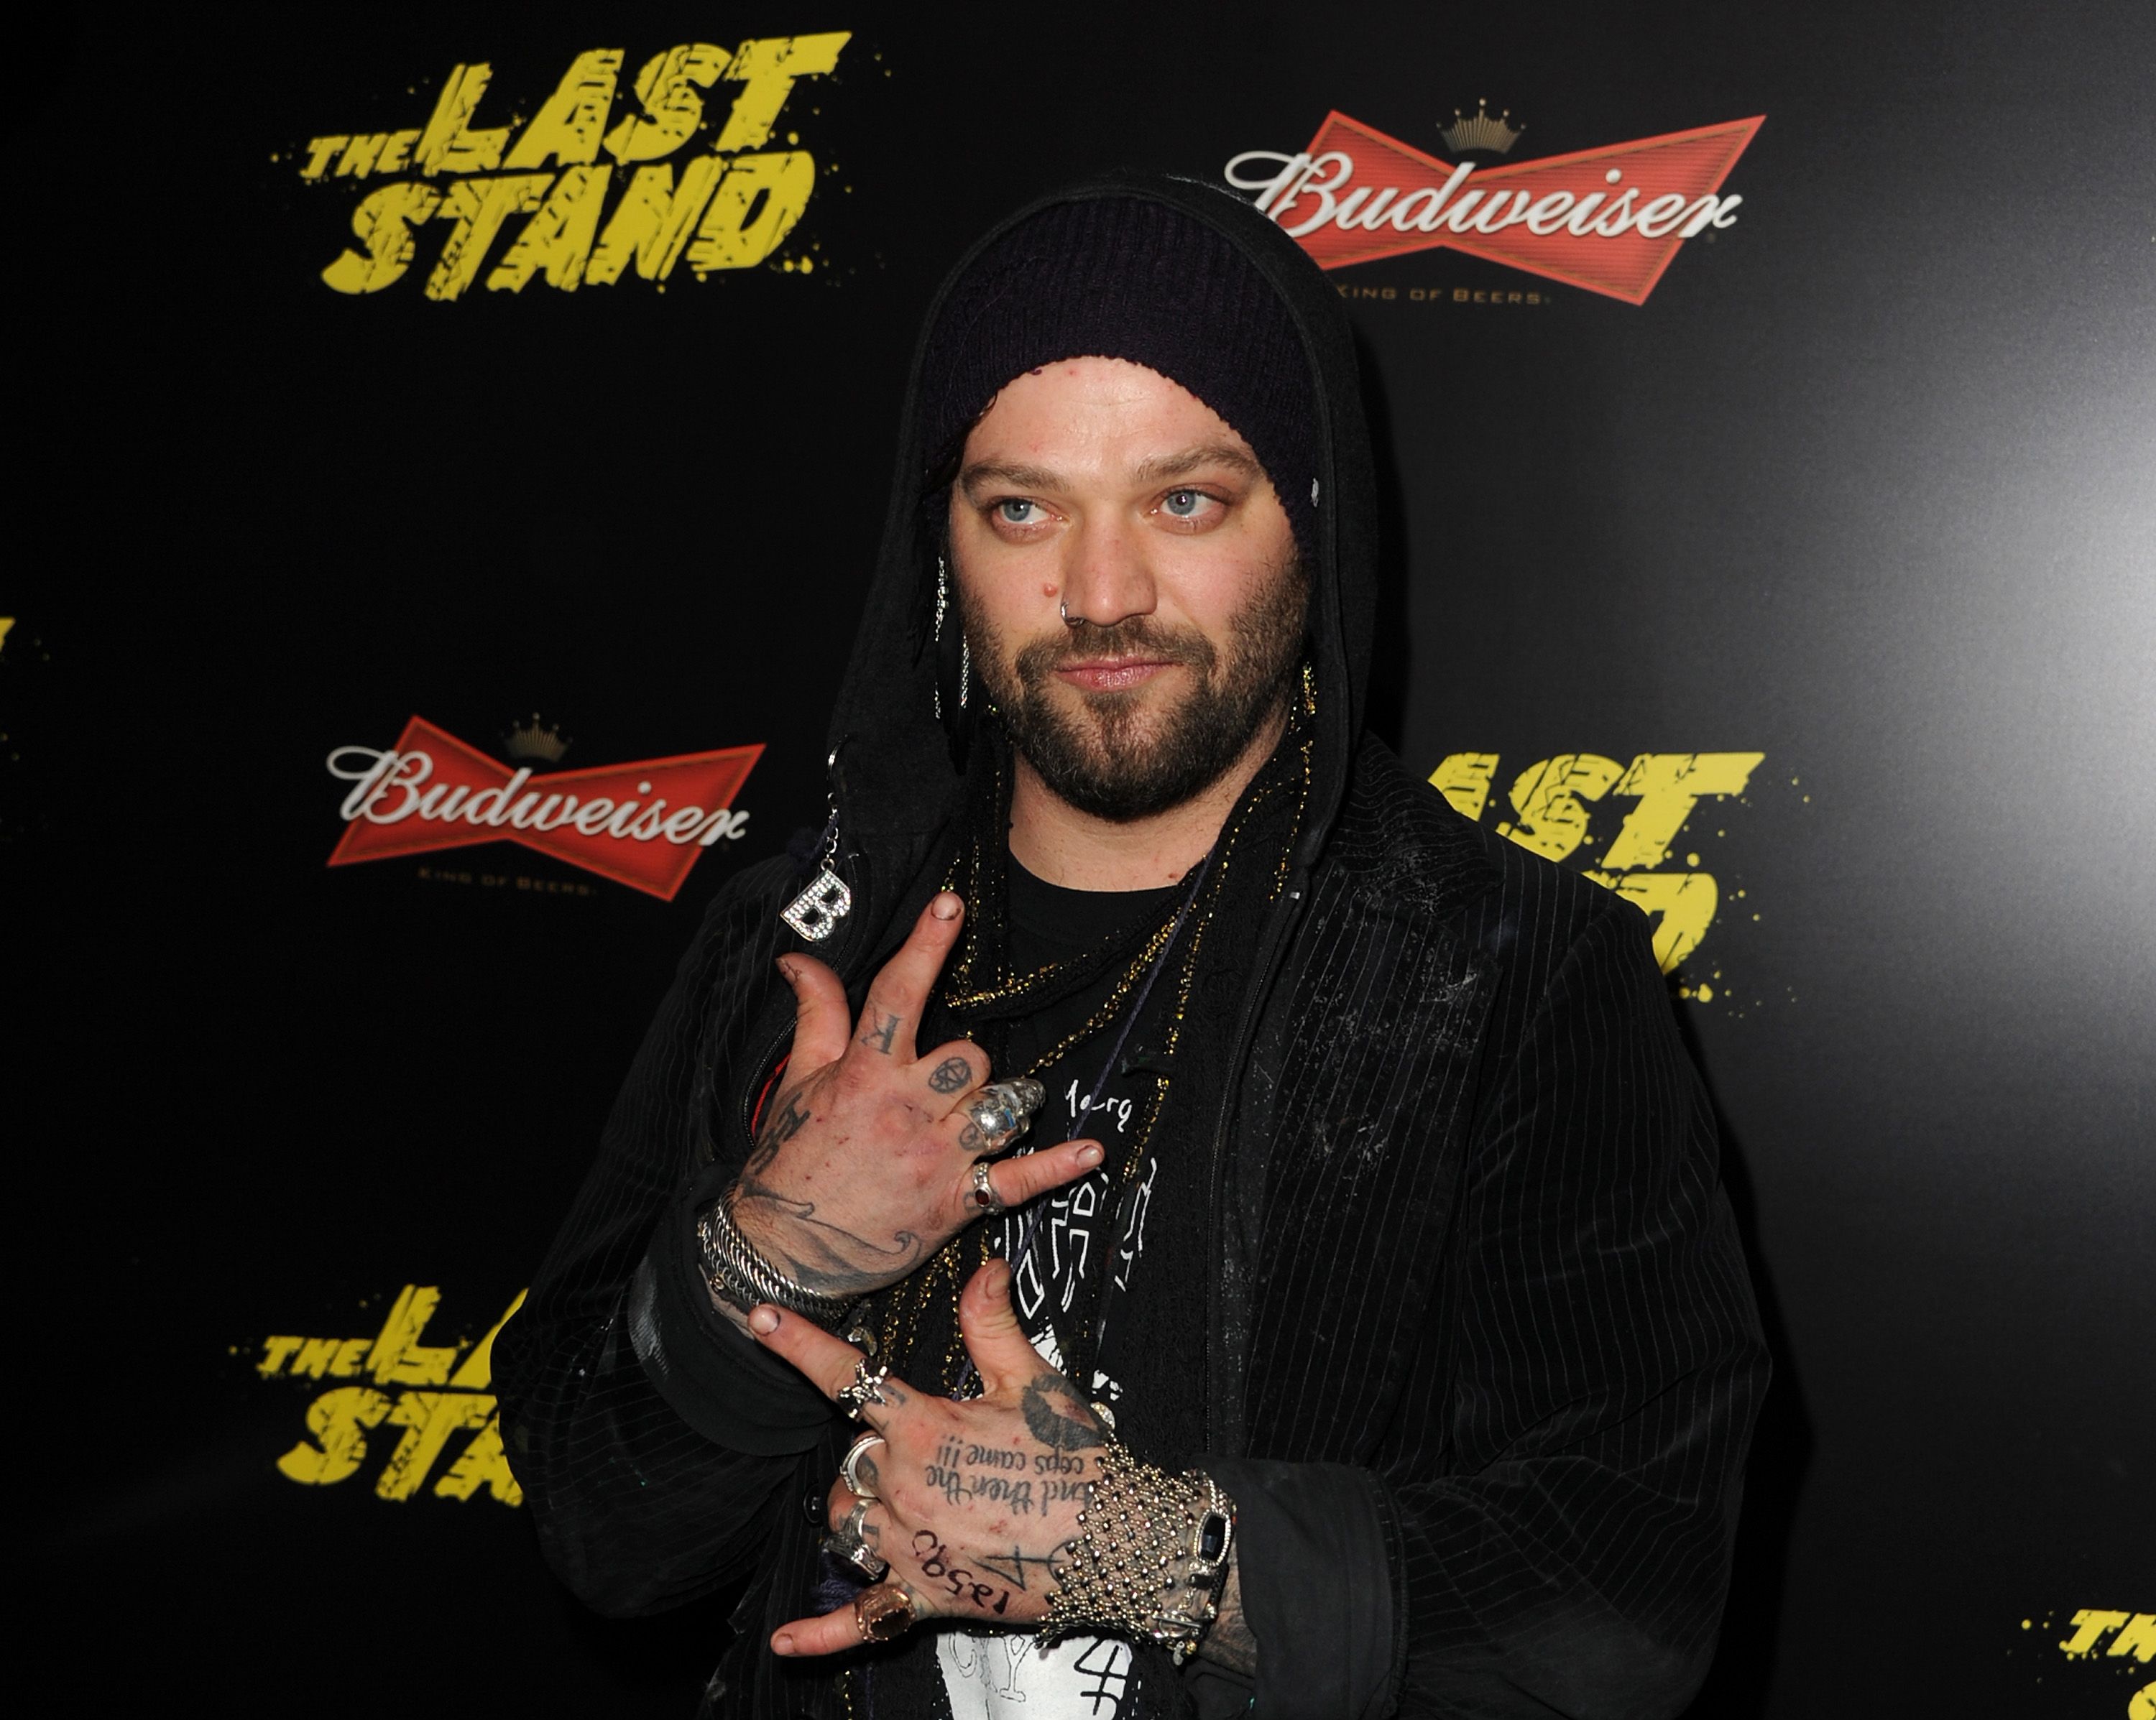 Bam Margera says he was 'pronounced dead' after suffering seizure | CNN